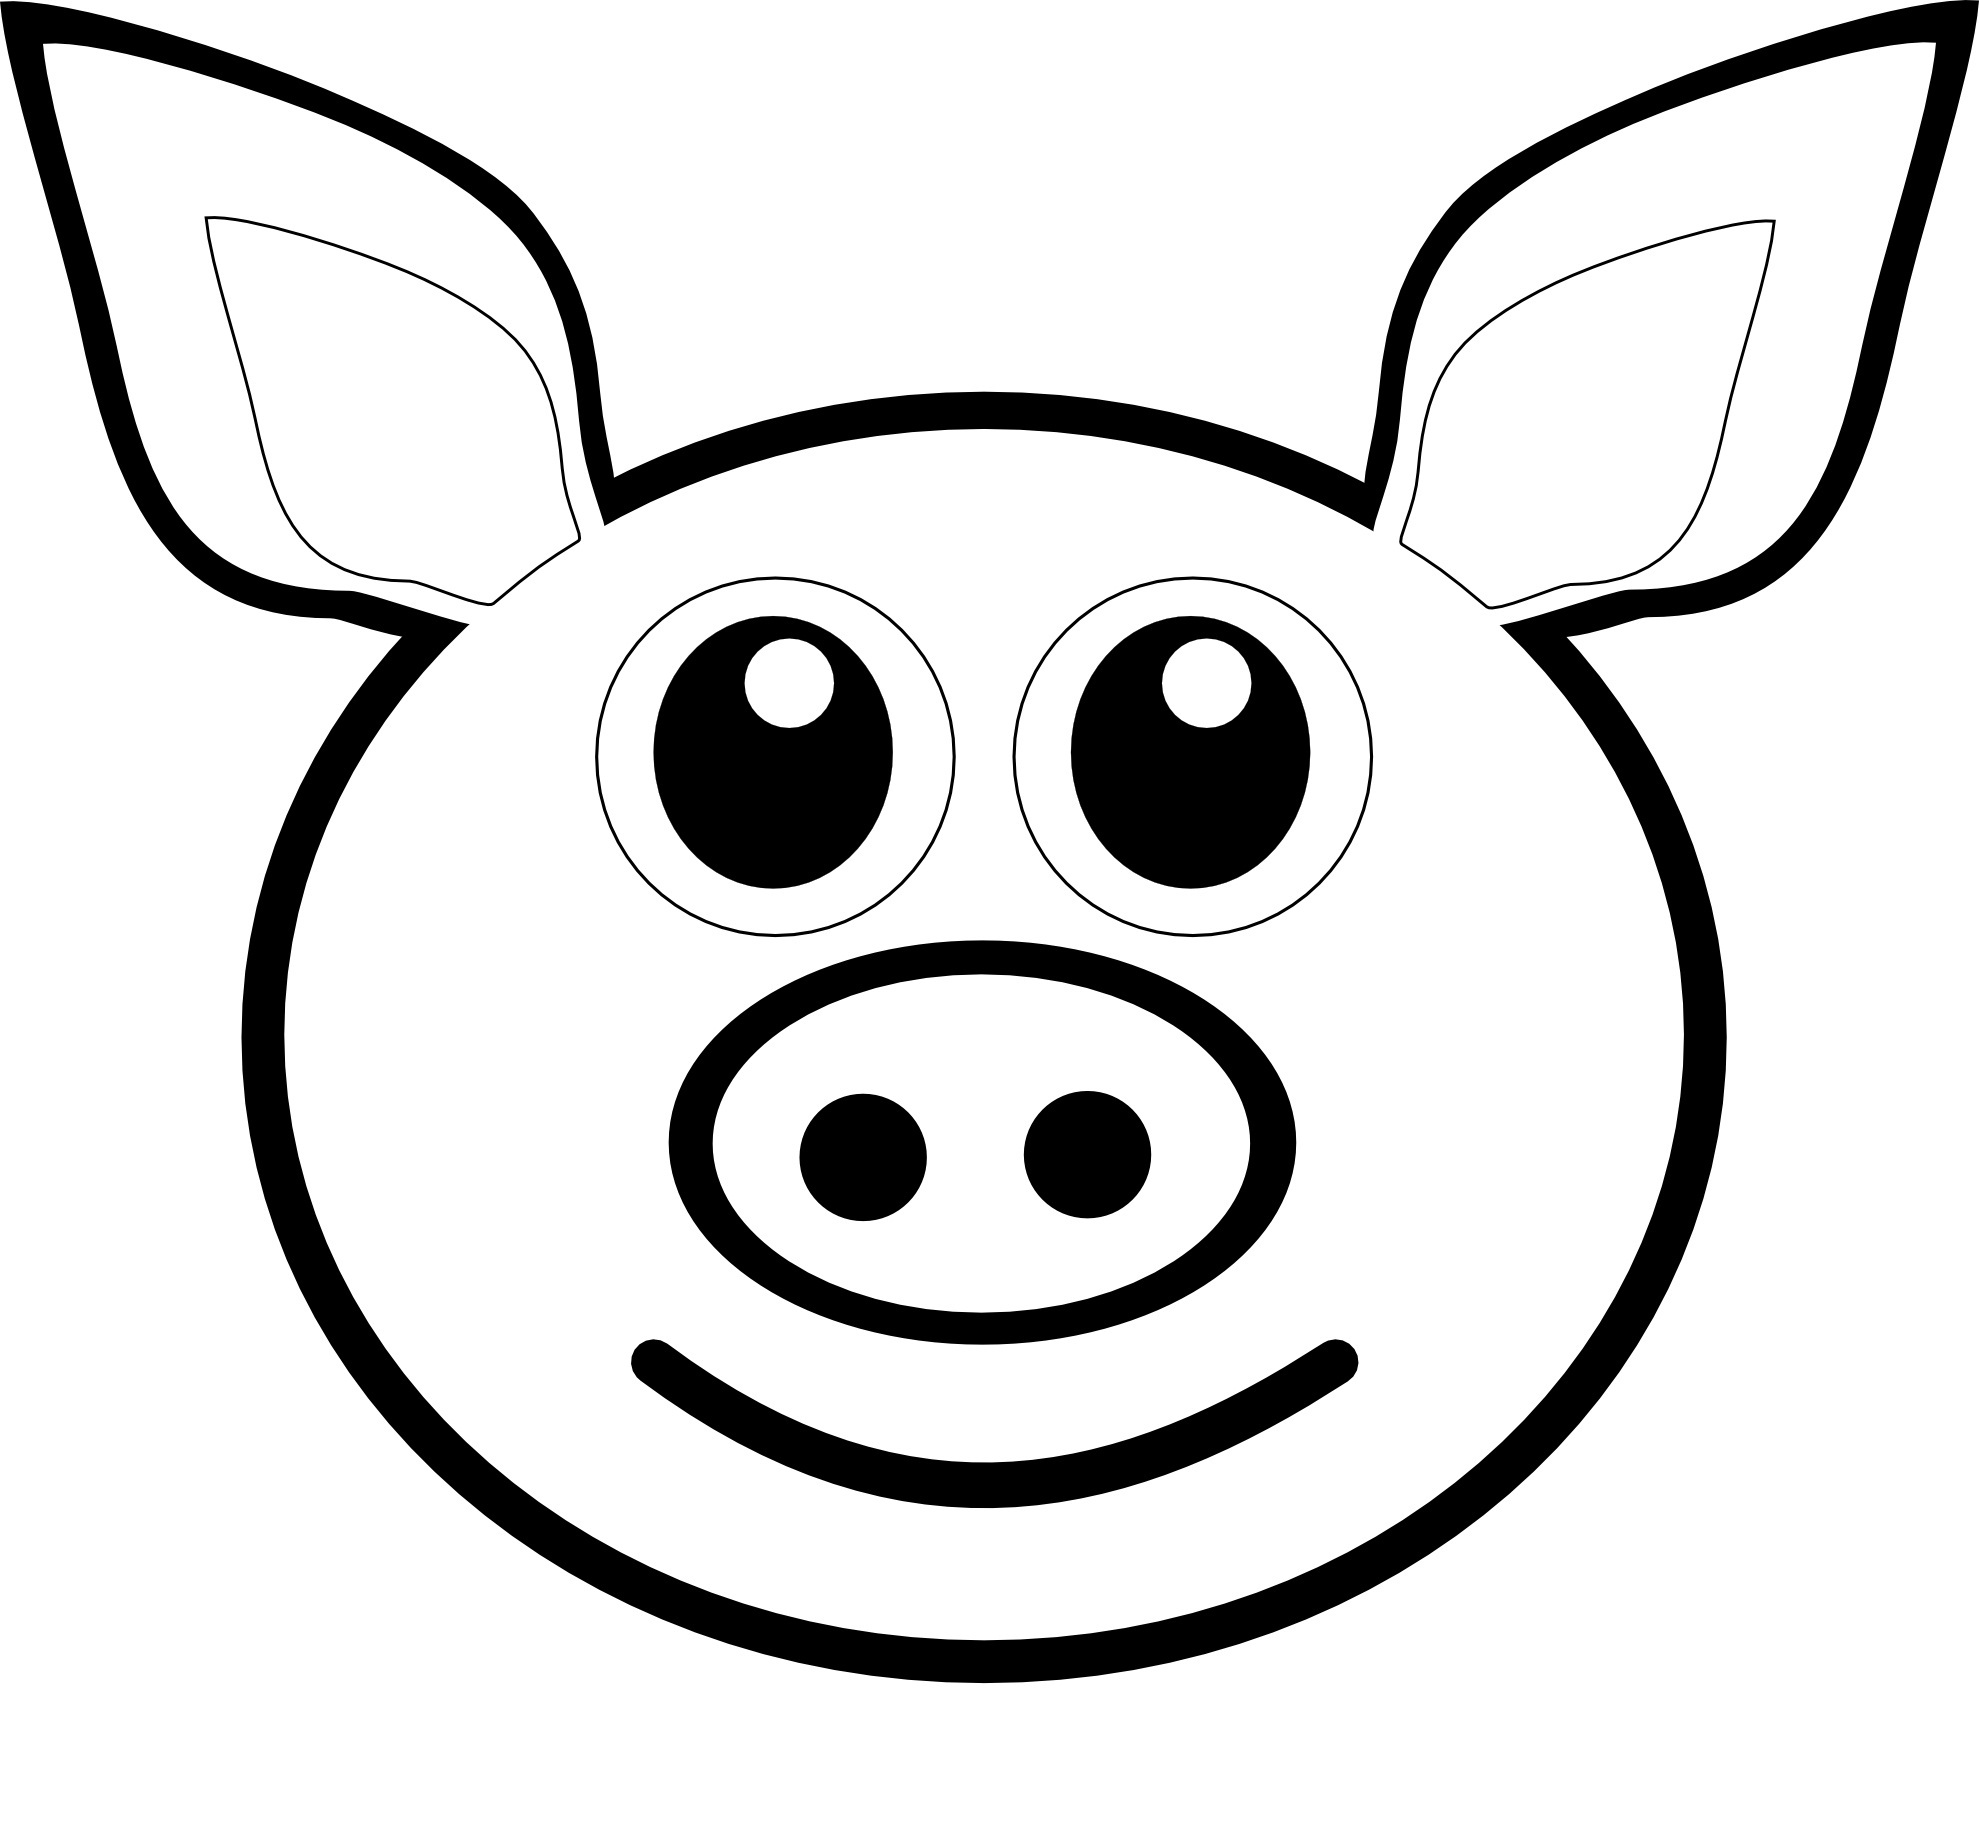 Cute Pig Black And White Clipart